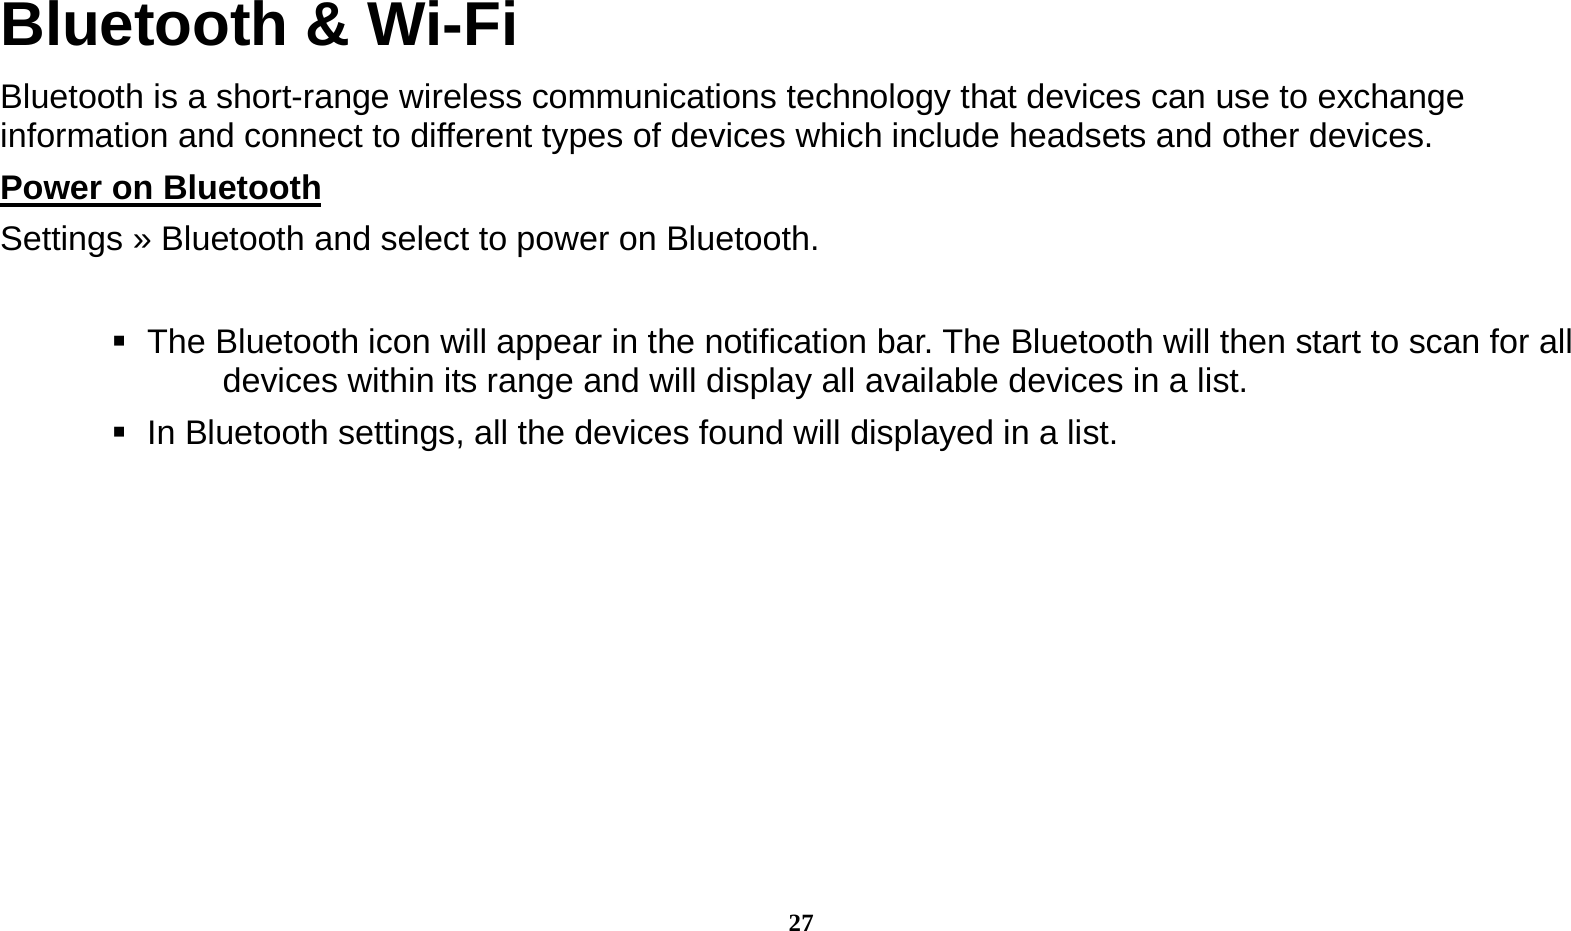  27 Bluetooth &amp; Wi-Fi Bluetooth is a short-range wireless communications technology that devices can use to exchange information and connect to different types of devices which include headsets and other devices. Power on Bluetooth                                                                                Settings » Bluetooth and select to power on Bluetooth.     The Bluetooth icon will appear in the notification bar. The Bluetooth will then start to scan for all devices within its range and will display all available devices in a list.    In Bluetooth settings, all the devices found will displayed in a list.  